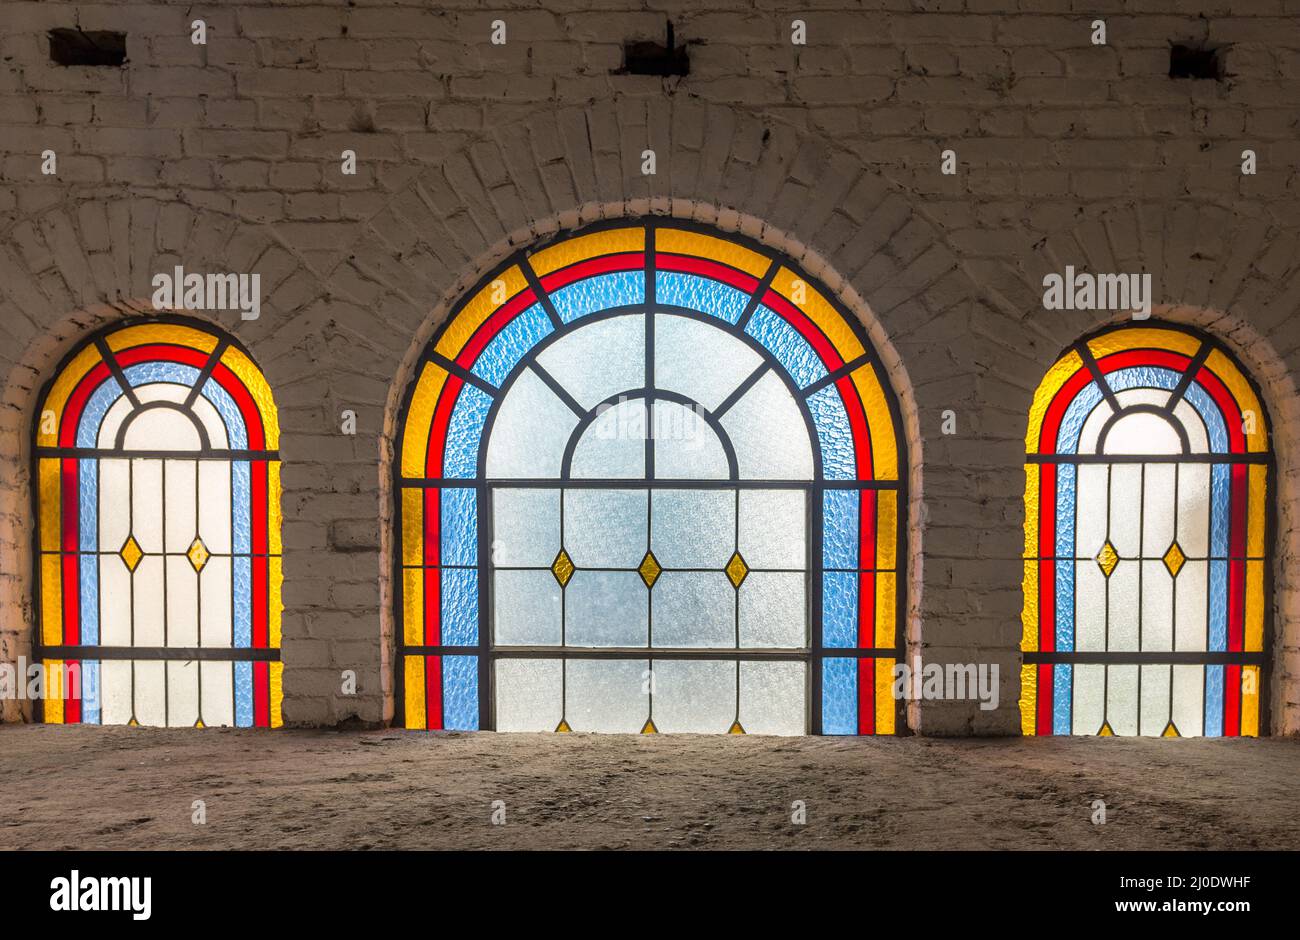 Stained glass windows at the catholic church Stock Photo